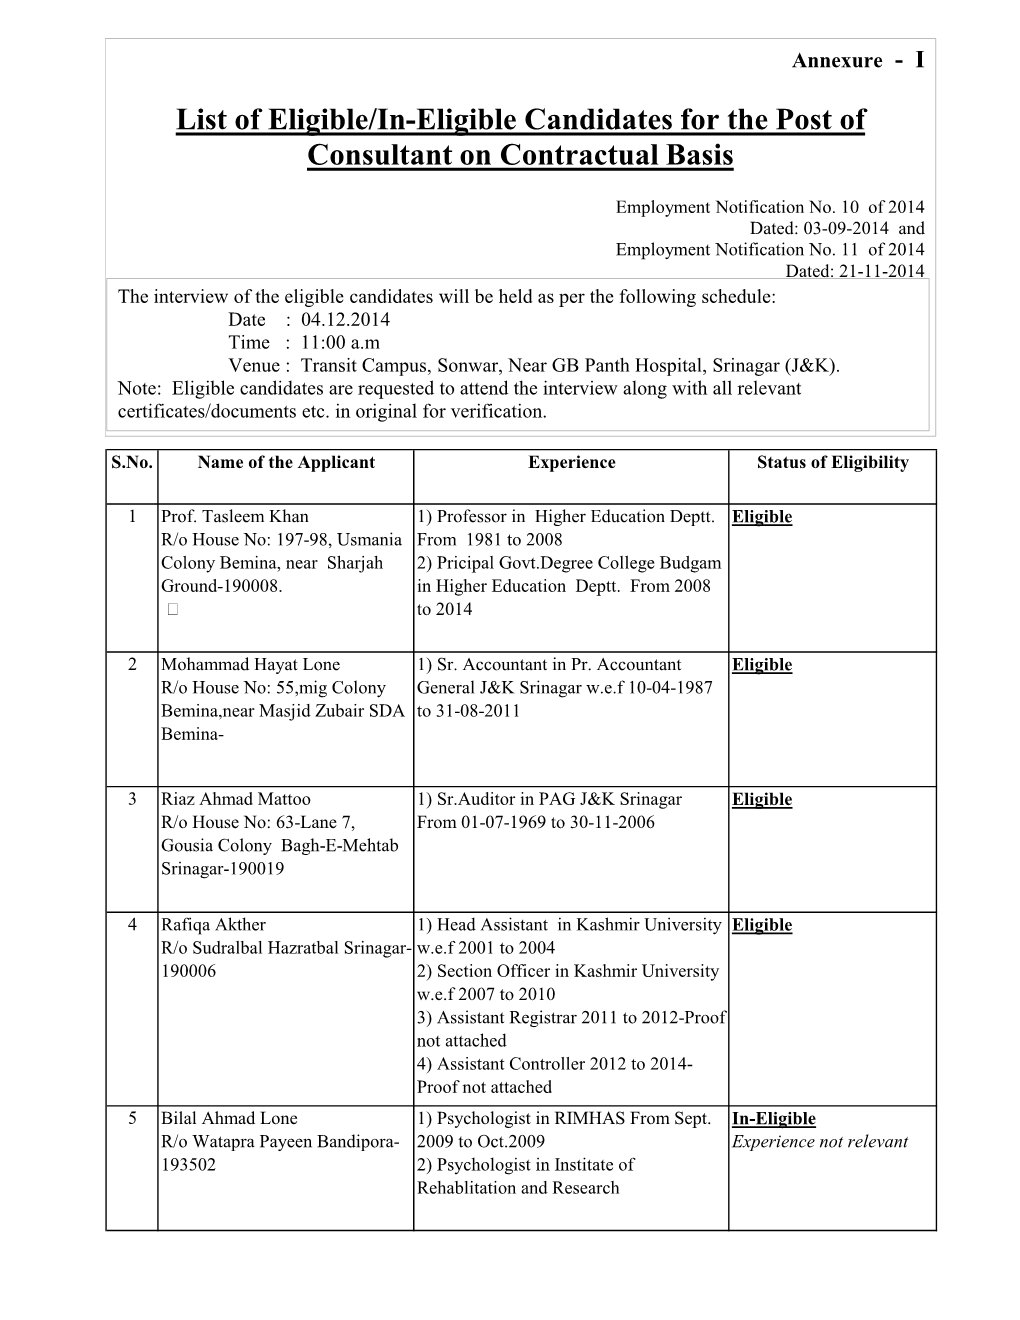 List of Eligible/In-Eligible Candidates for the Post of Consultant on Contractual Basis